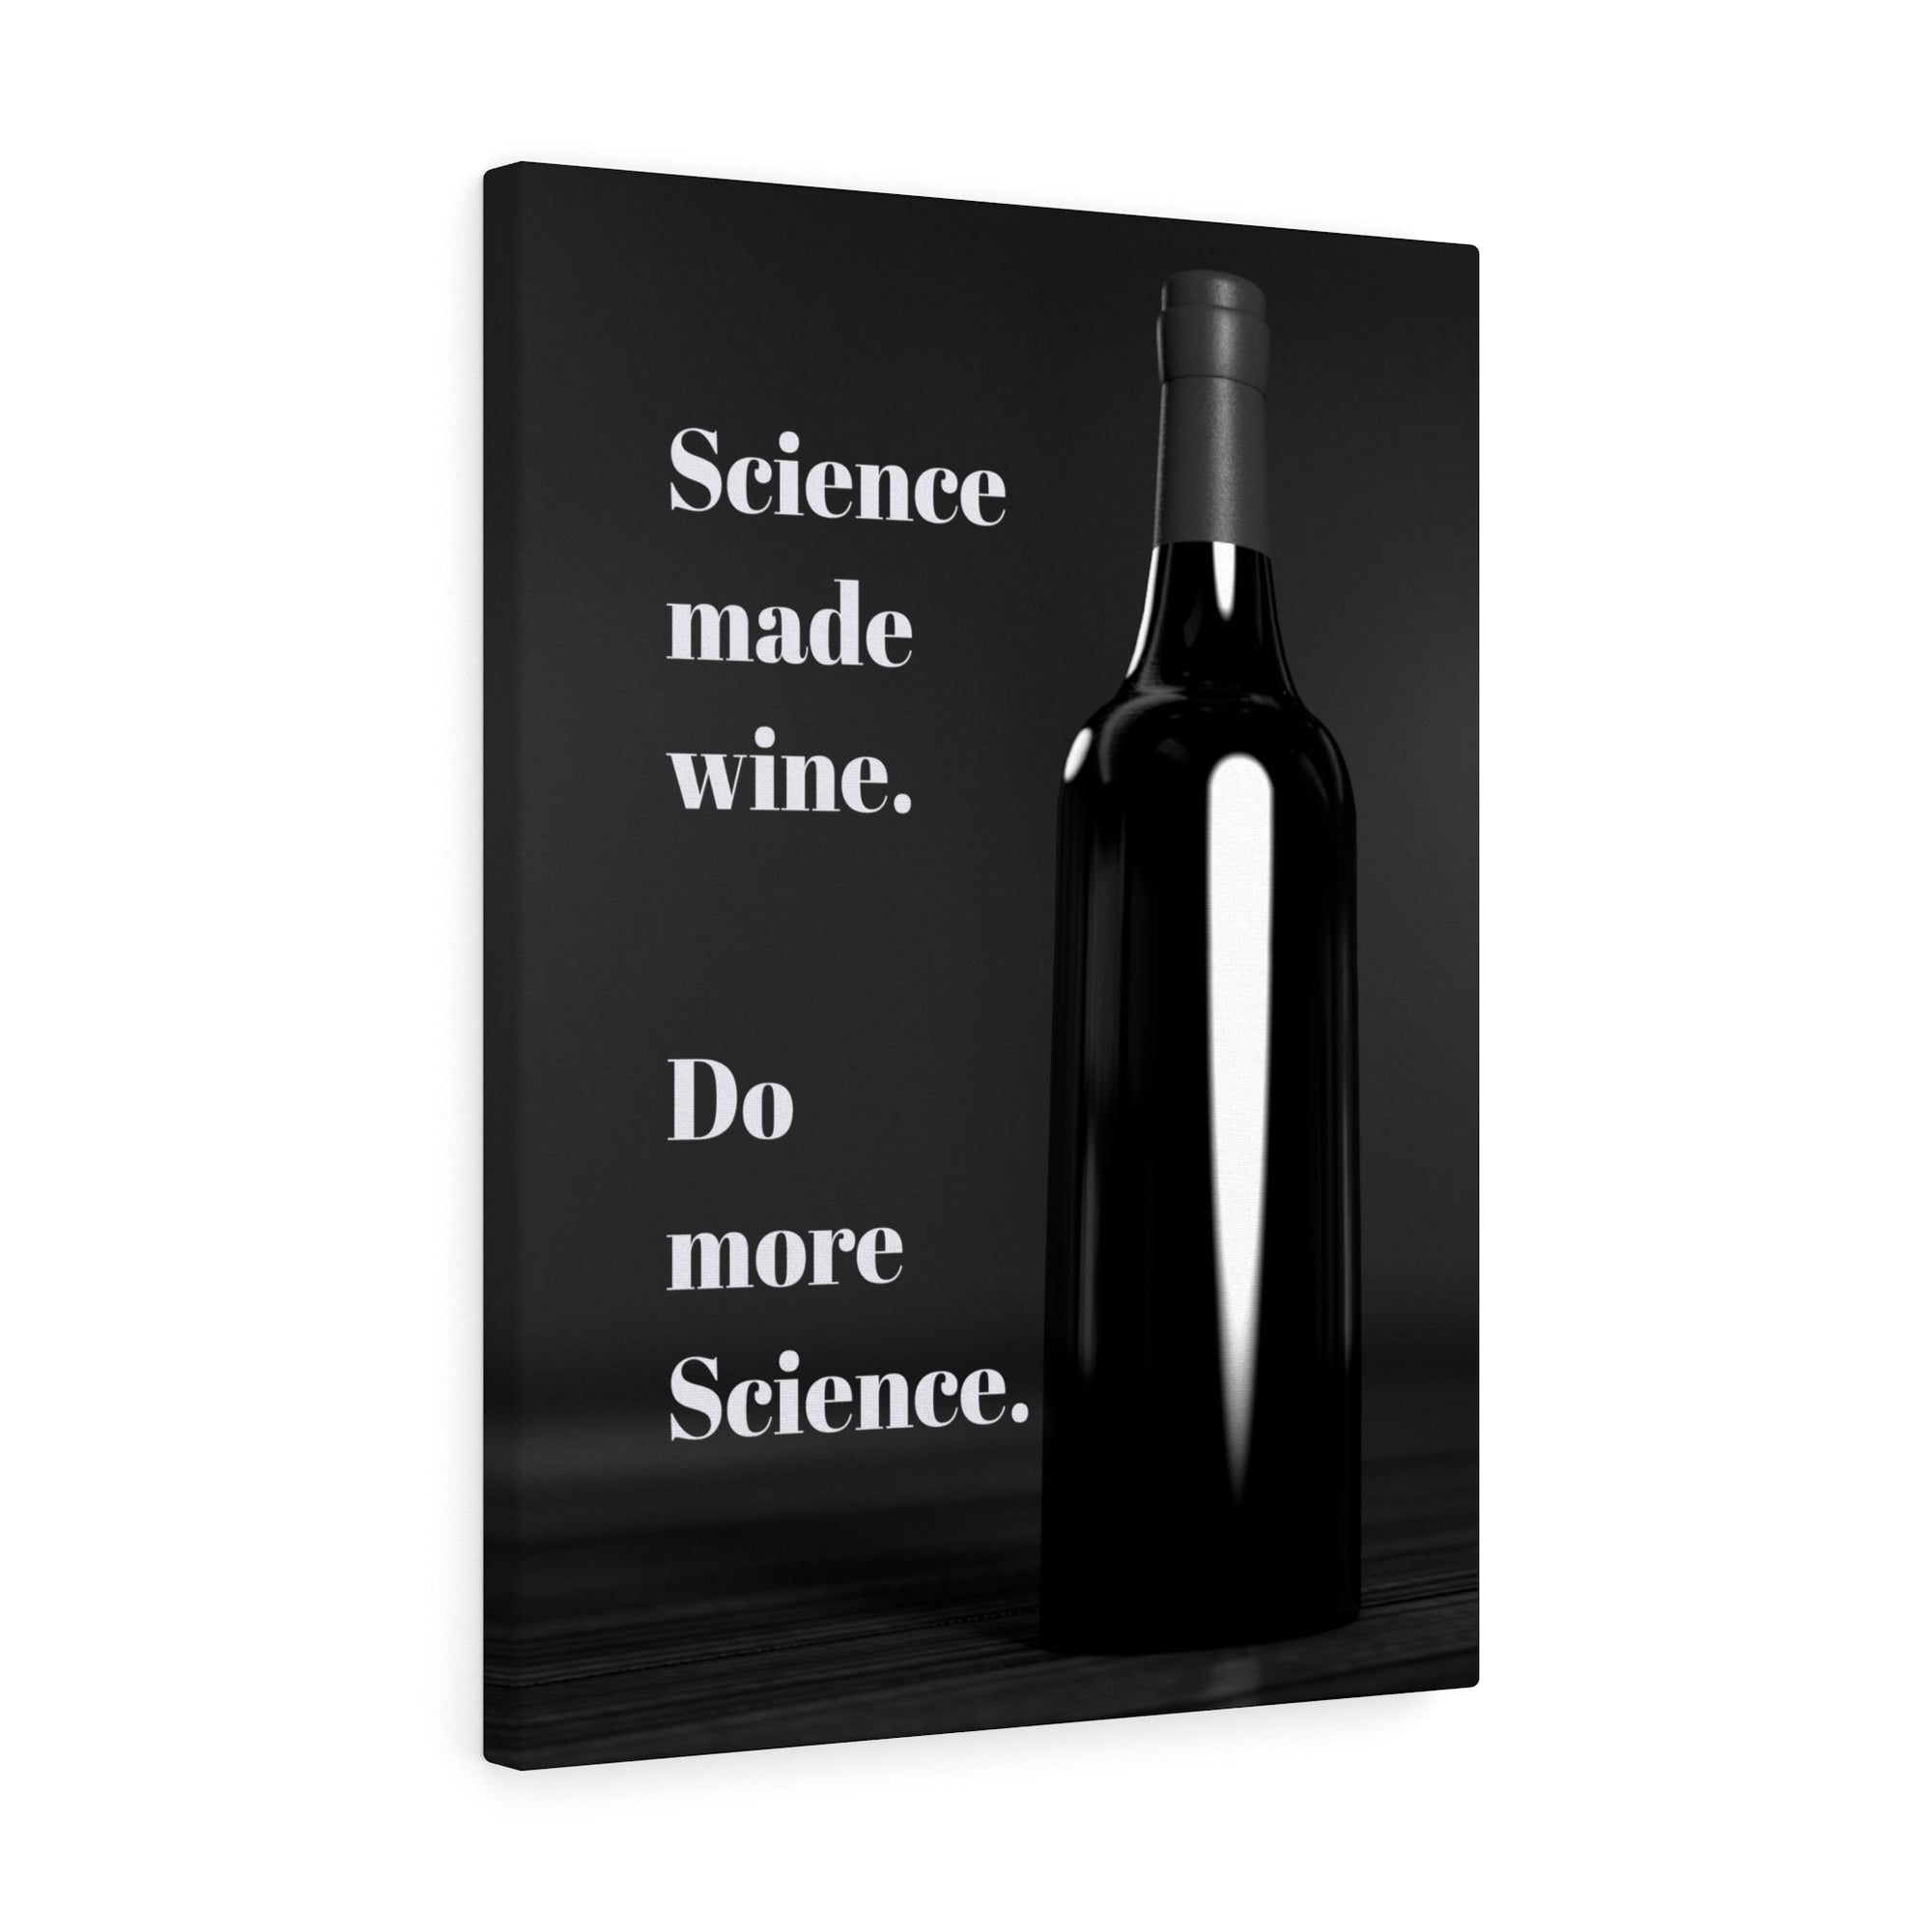 GLG - Science made wine. Do more science canvas wrap print